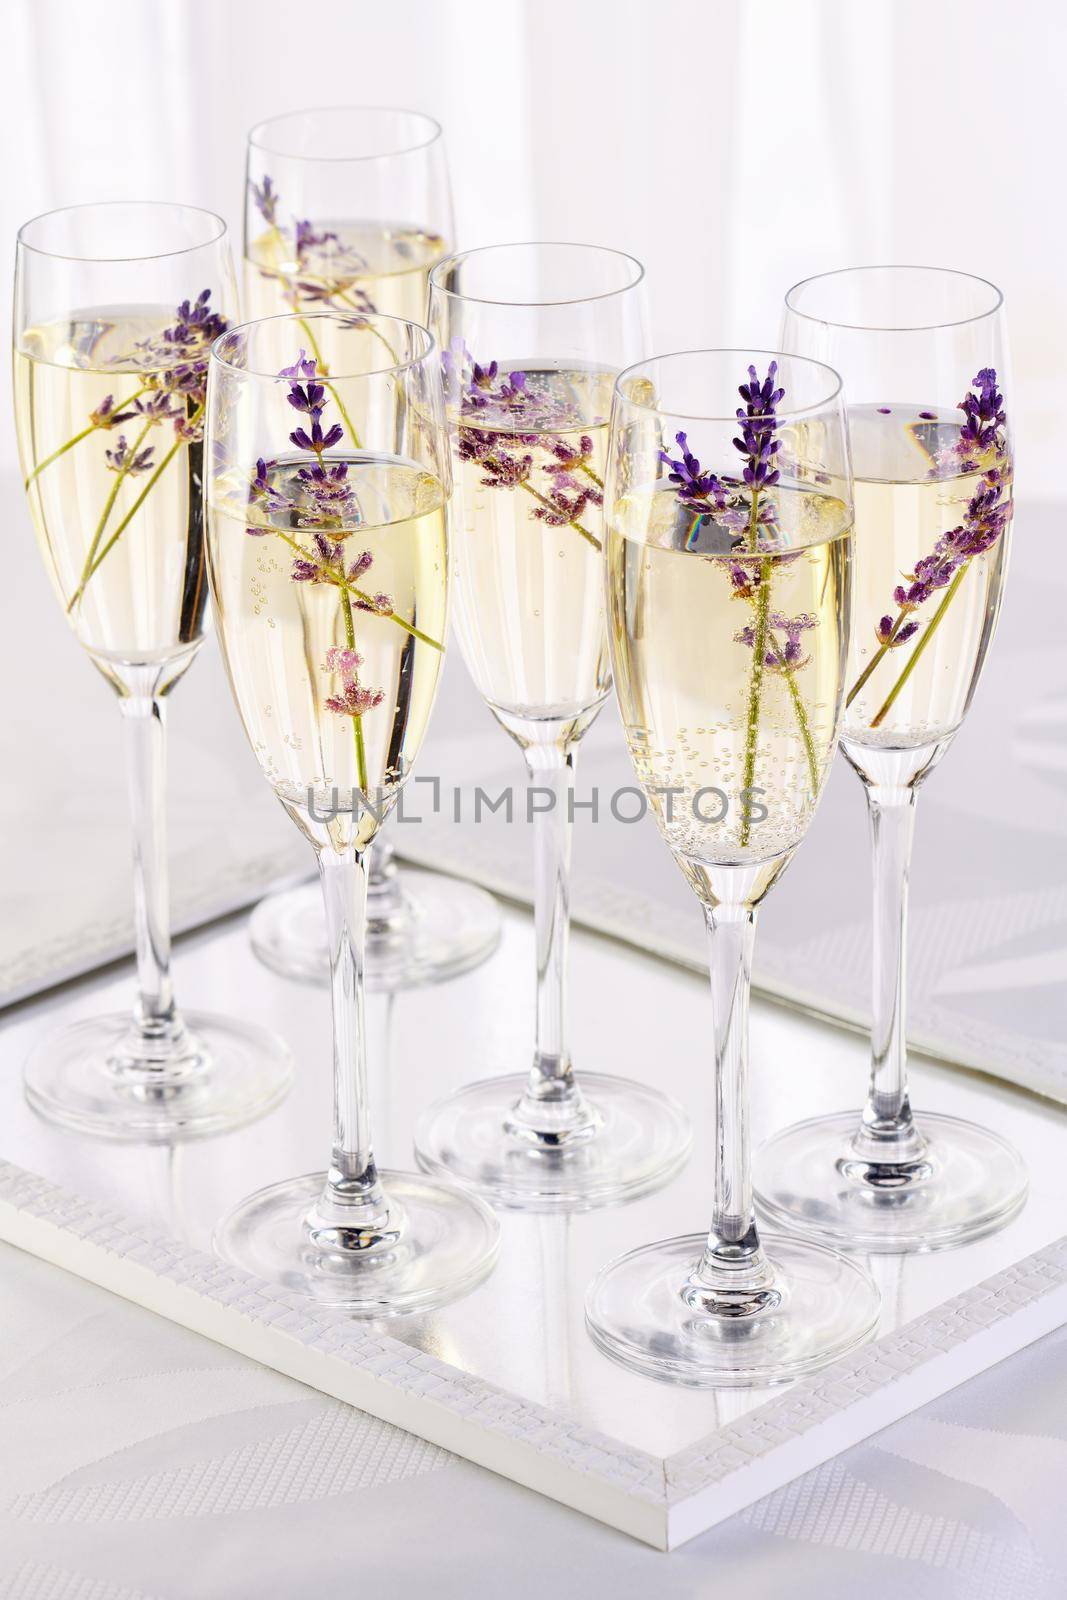 Sparkling lavender Champagne by Apolonia